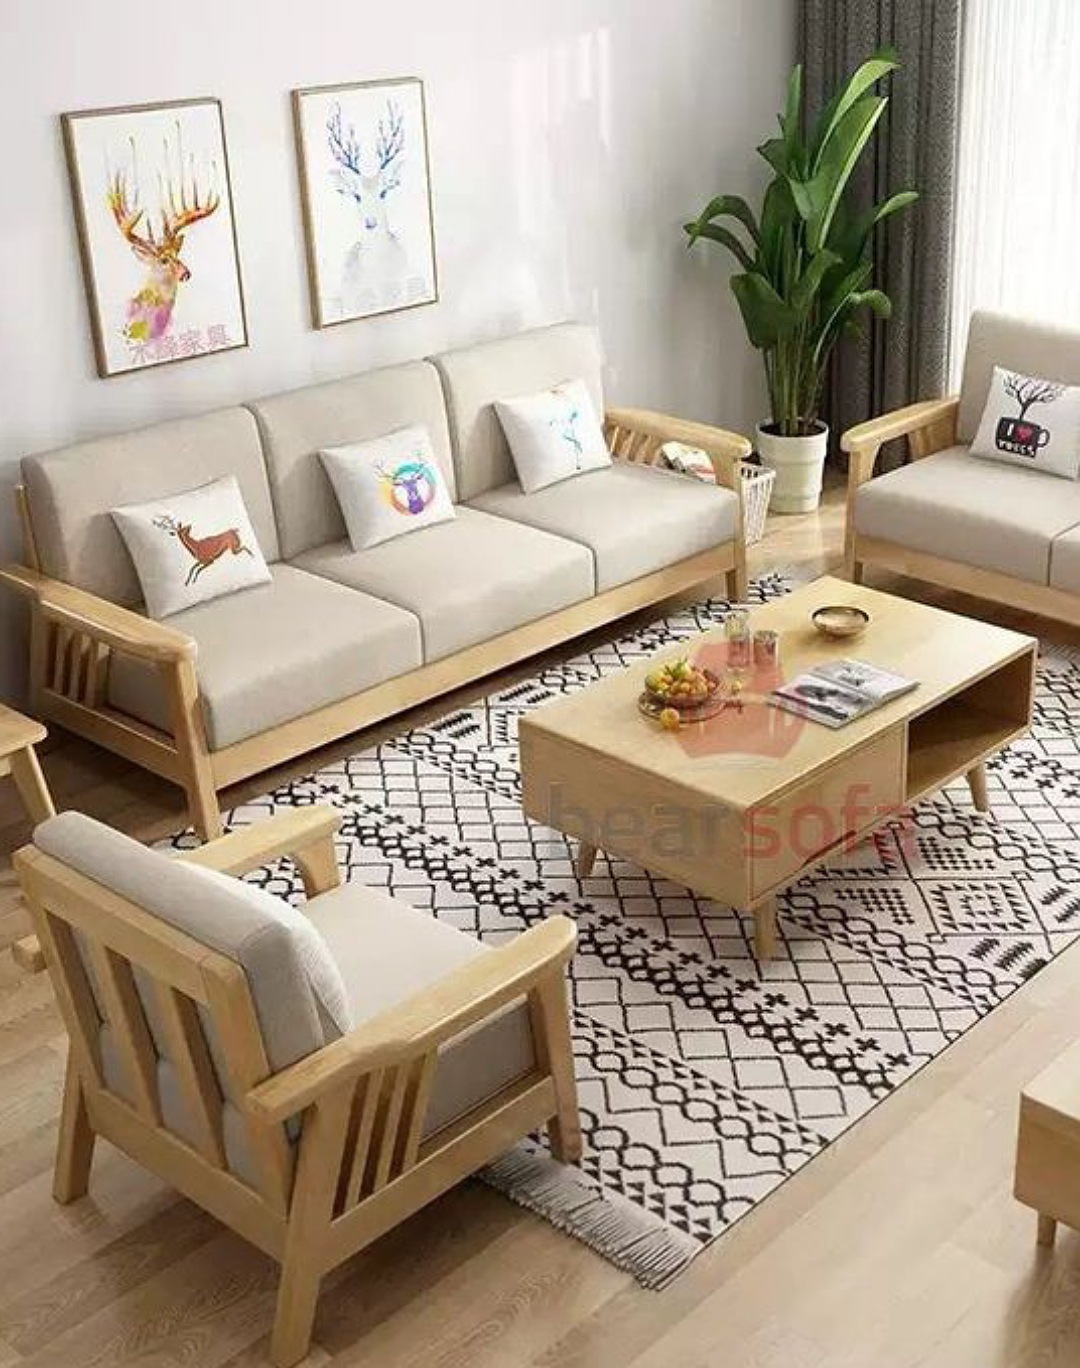 Shina wooden 6 seater...